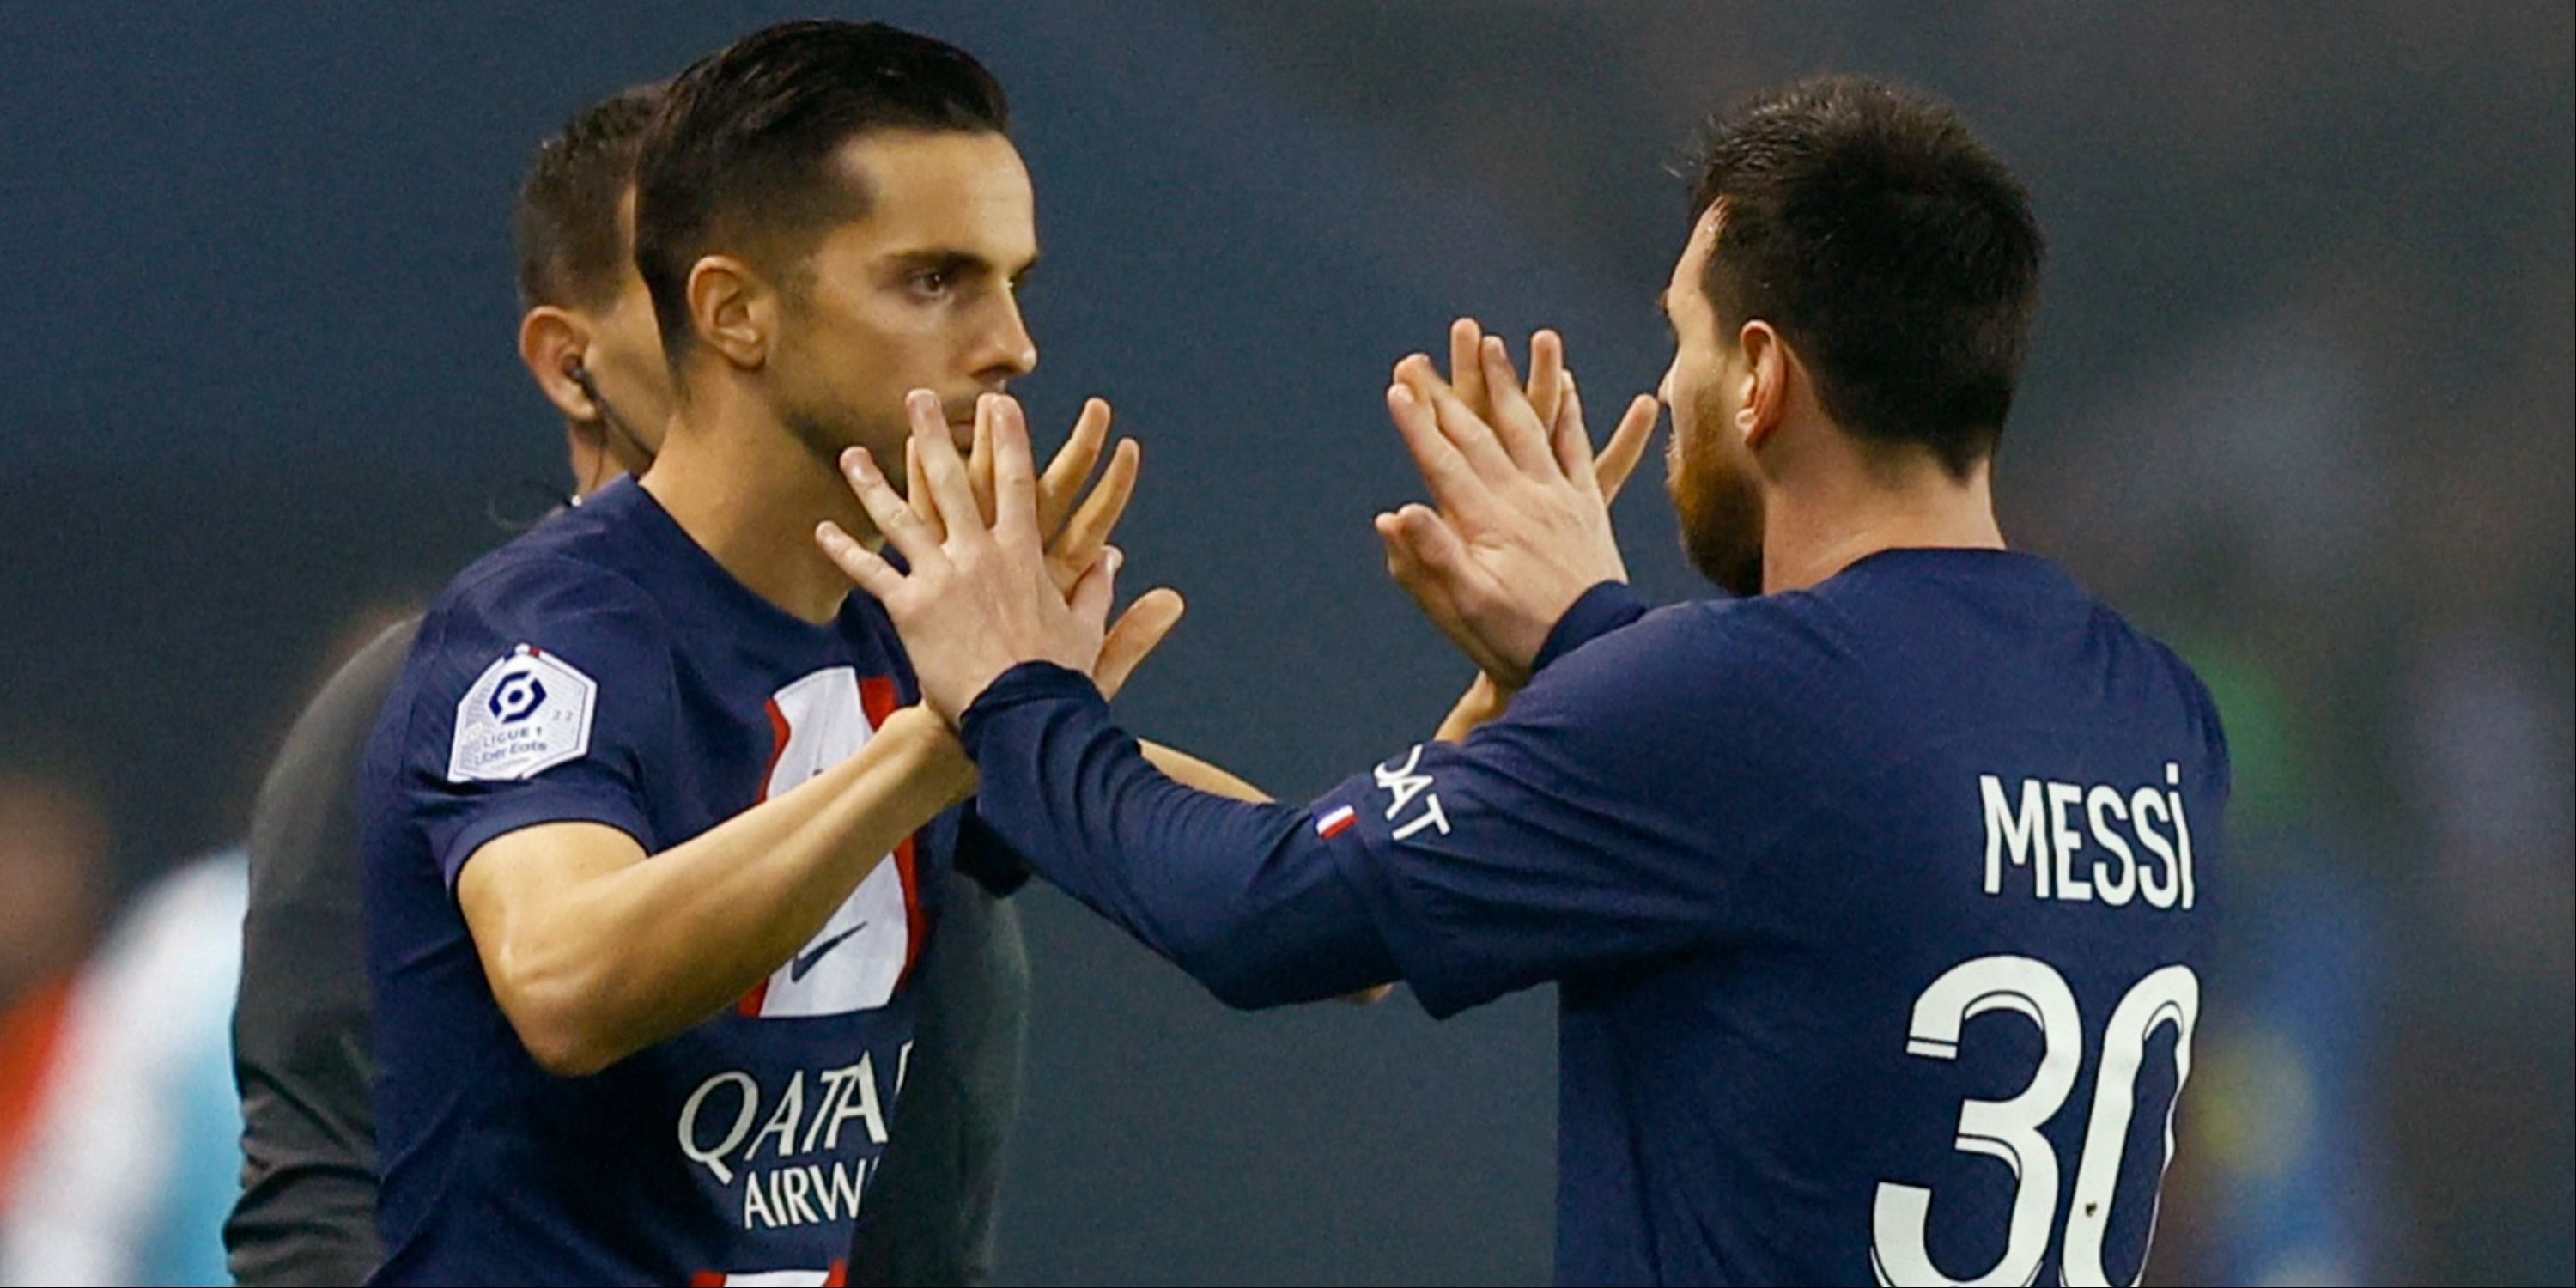 Paris St Germain's Pablo Sarabia comes on as a substitute to replace Lionel Messi